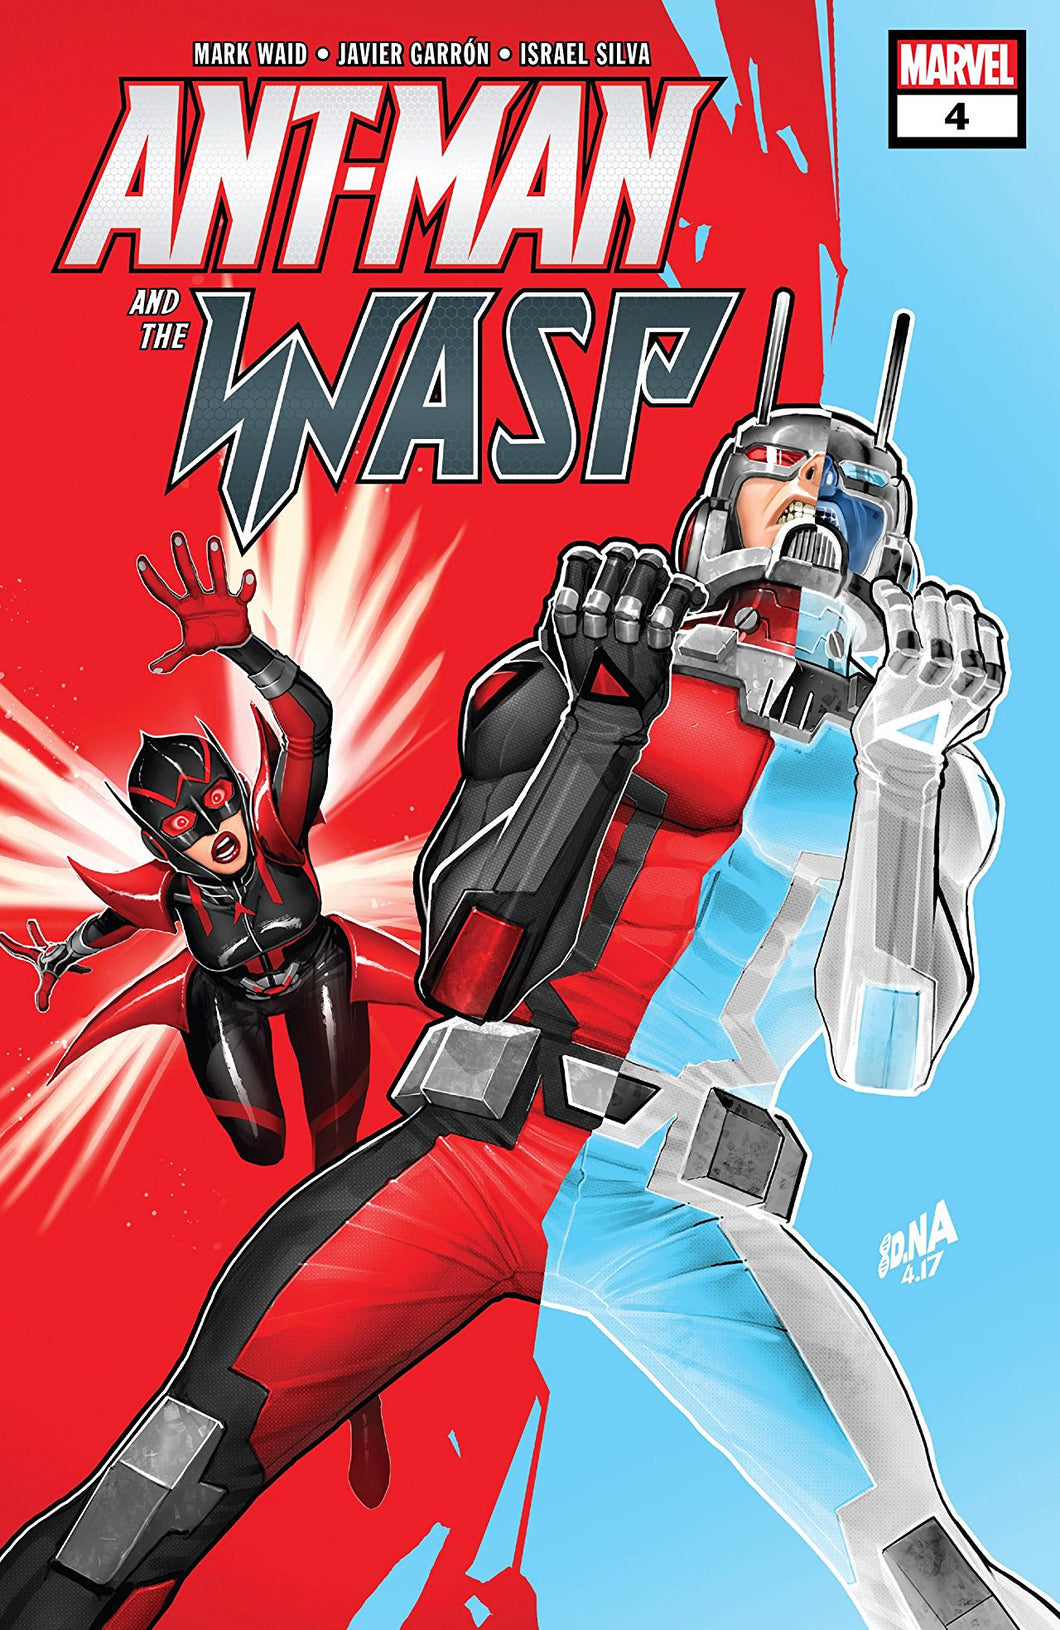 ANT-MAN AND THE WASP #4 (OF 5) (08/01/2018)